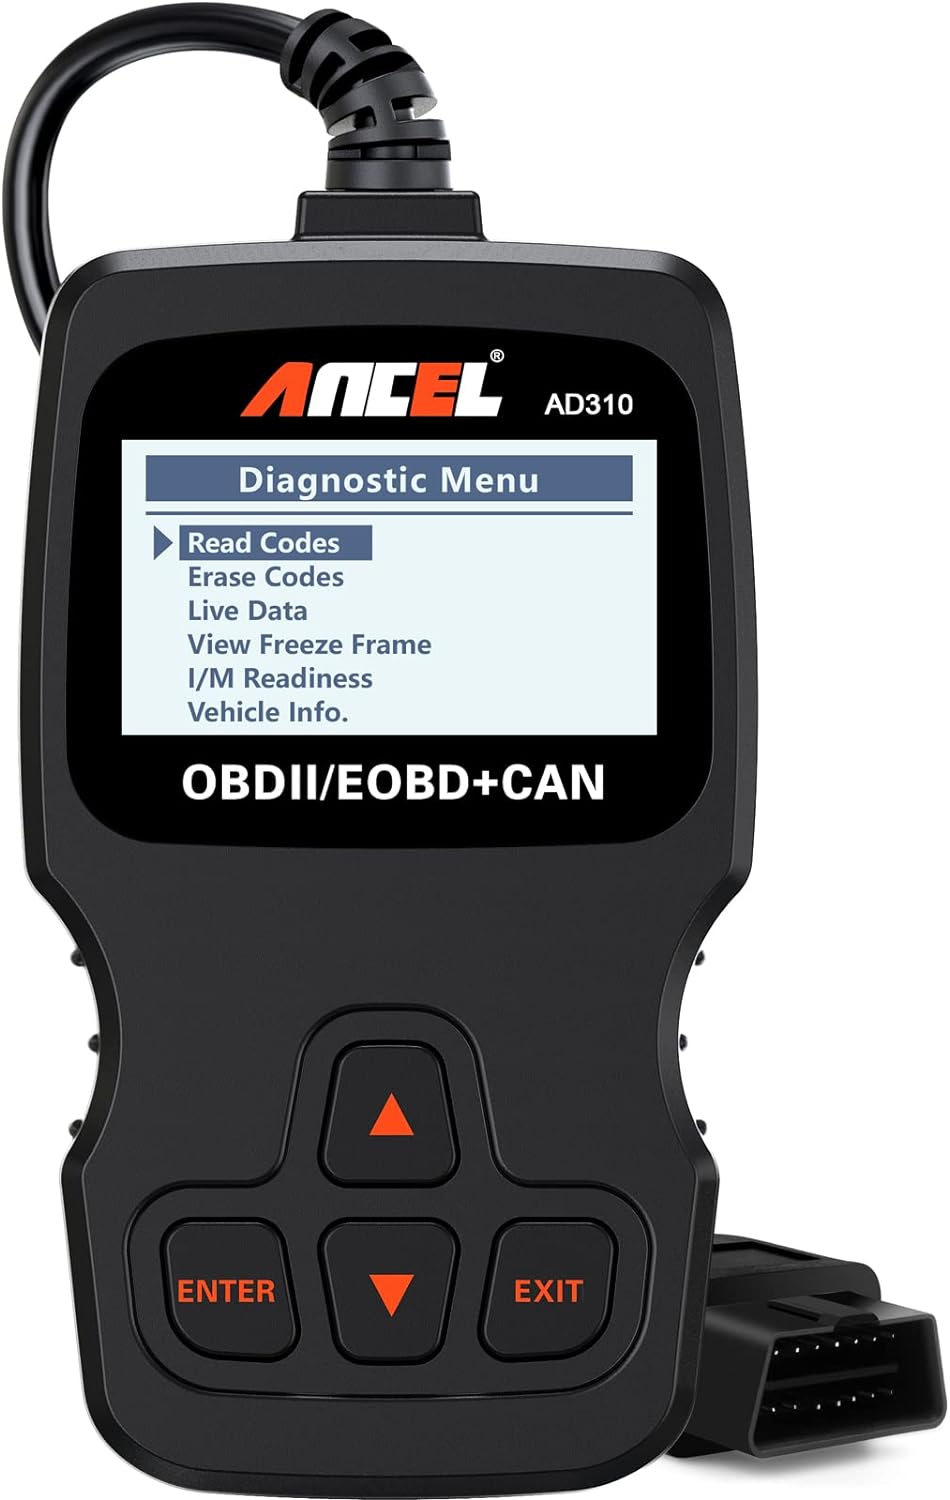 Ancel AD310 OBD II Diagnostic Scan Tool $12.59 + Free Shipping (expired)